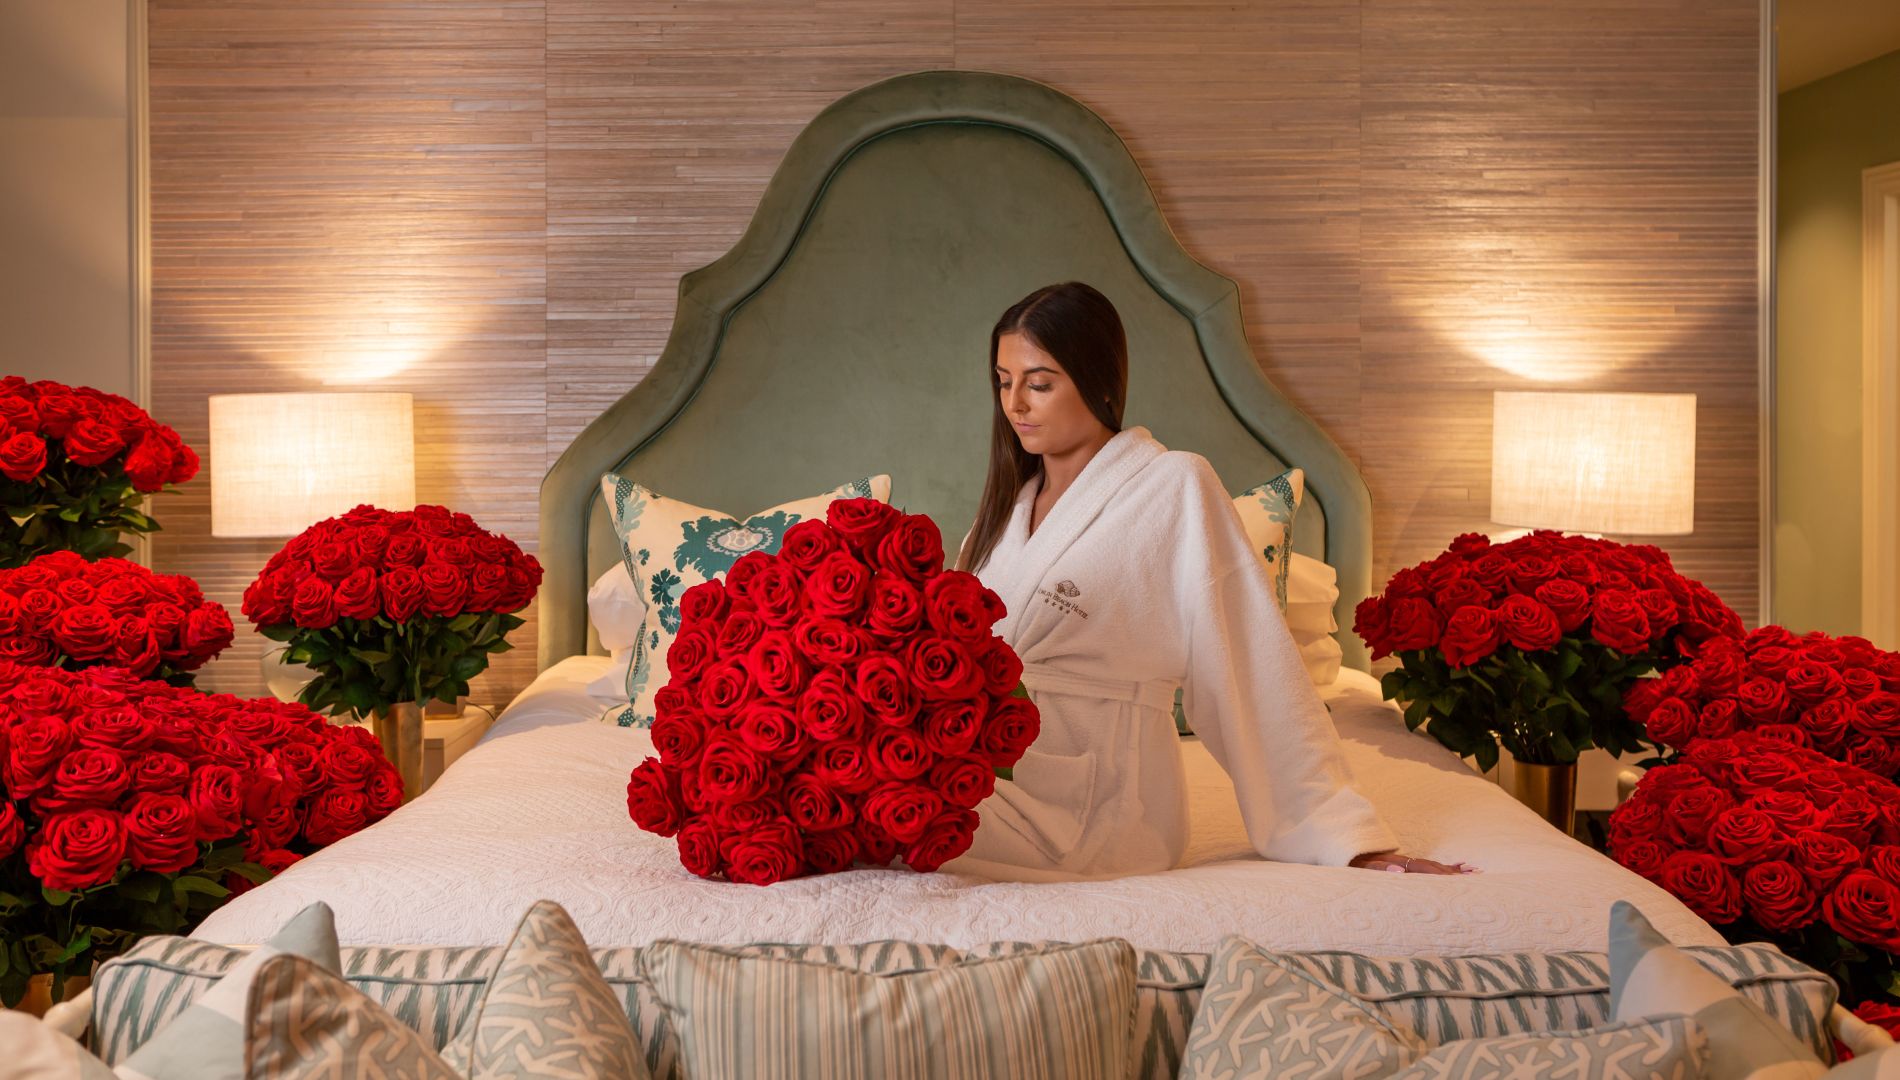 A Person Sitting On A Bed With A Red Flower